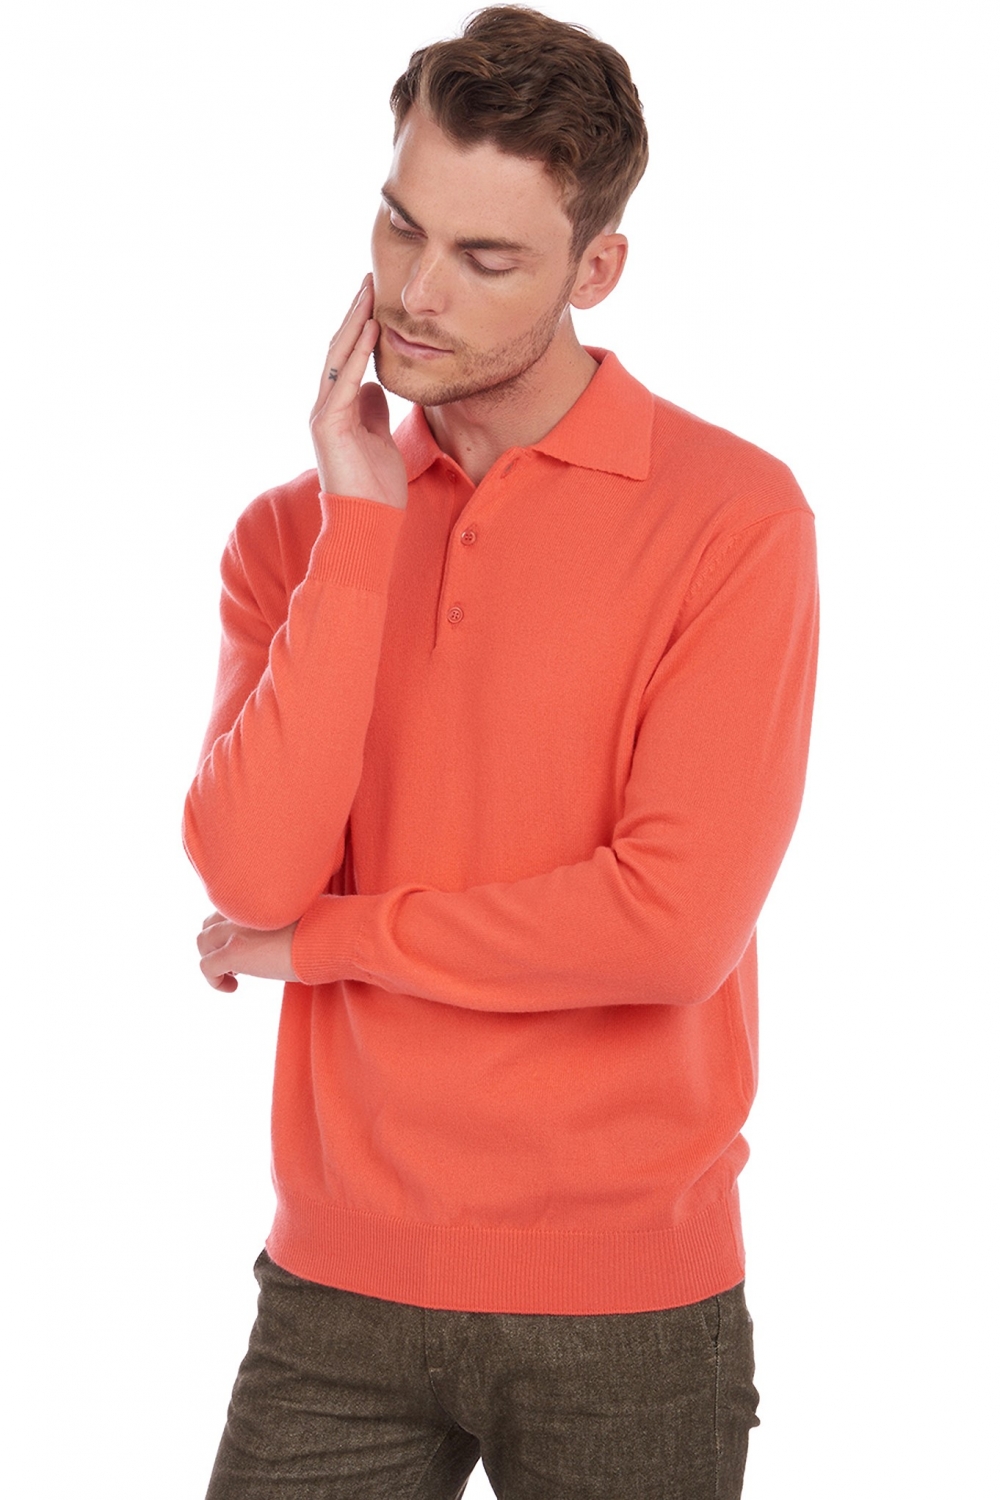 Cashmere men polo style sweaters alexandre coral 4xl